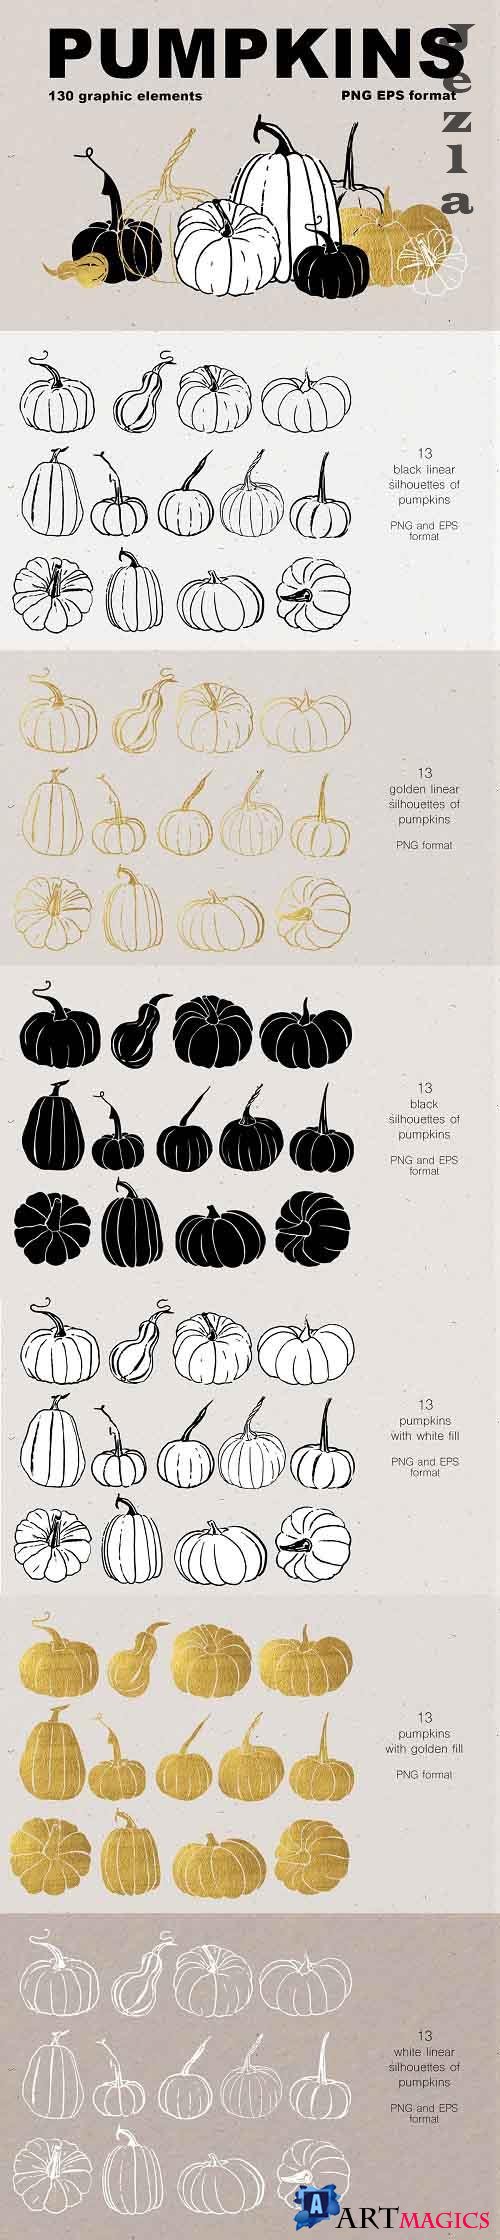 Pumpkins. Graphic collection - 5513384